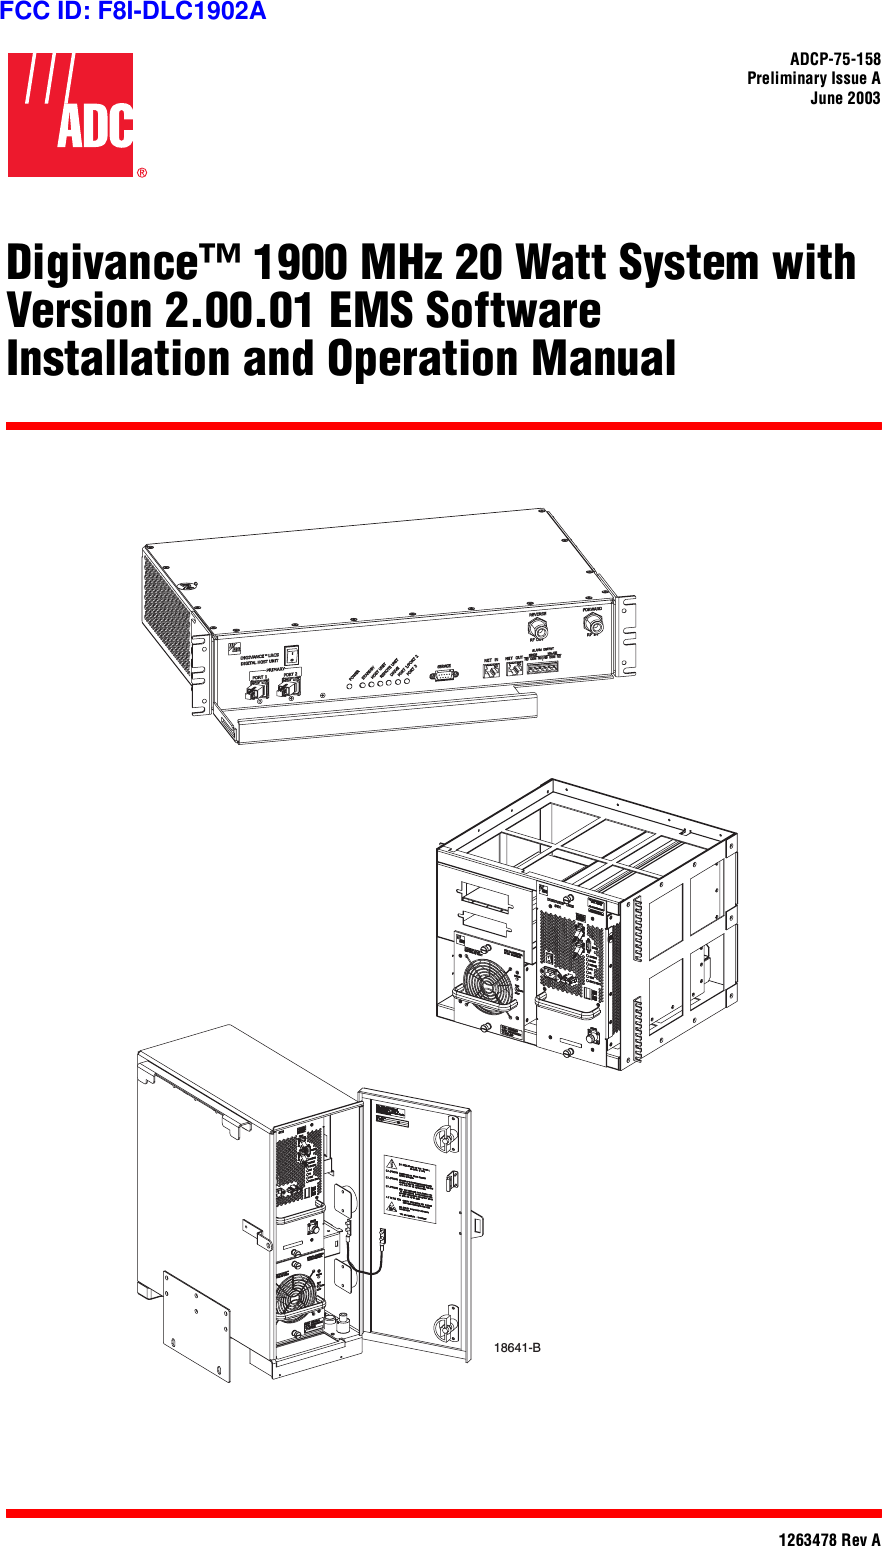 ADCP-75-158Preliminary Issue AJune 20031263478 Rev ADigivance™ 1900 MHz 20 Watt System withVersion 2.00.01 EMS SoftwareInstallation and Operation Manual18641-BFCC ID: F8I-DLC1902A